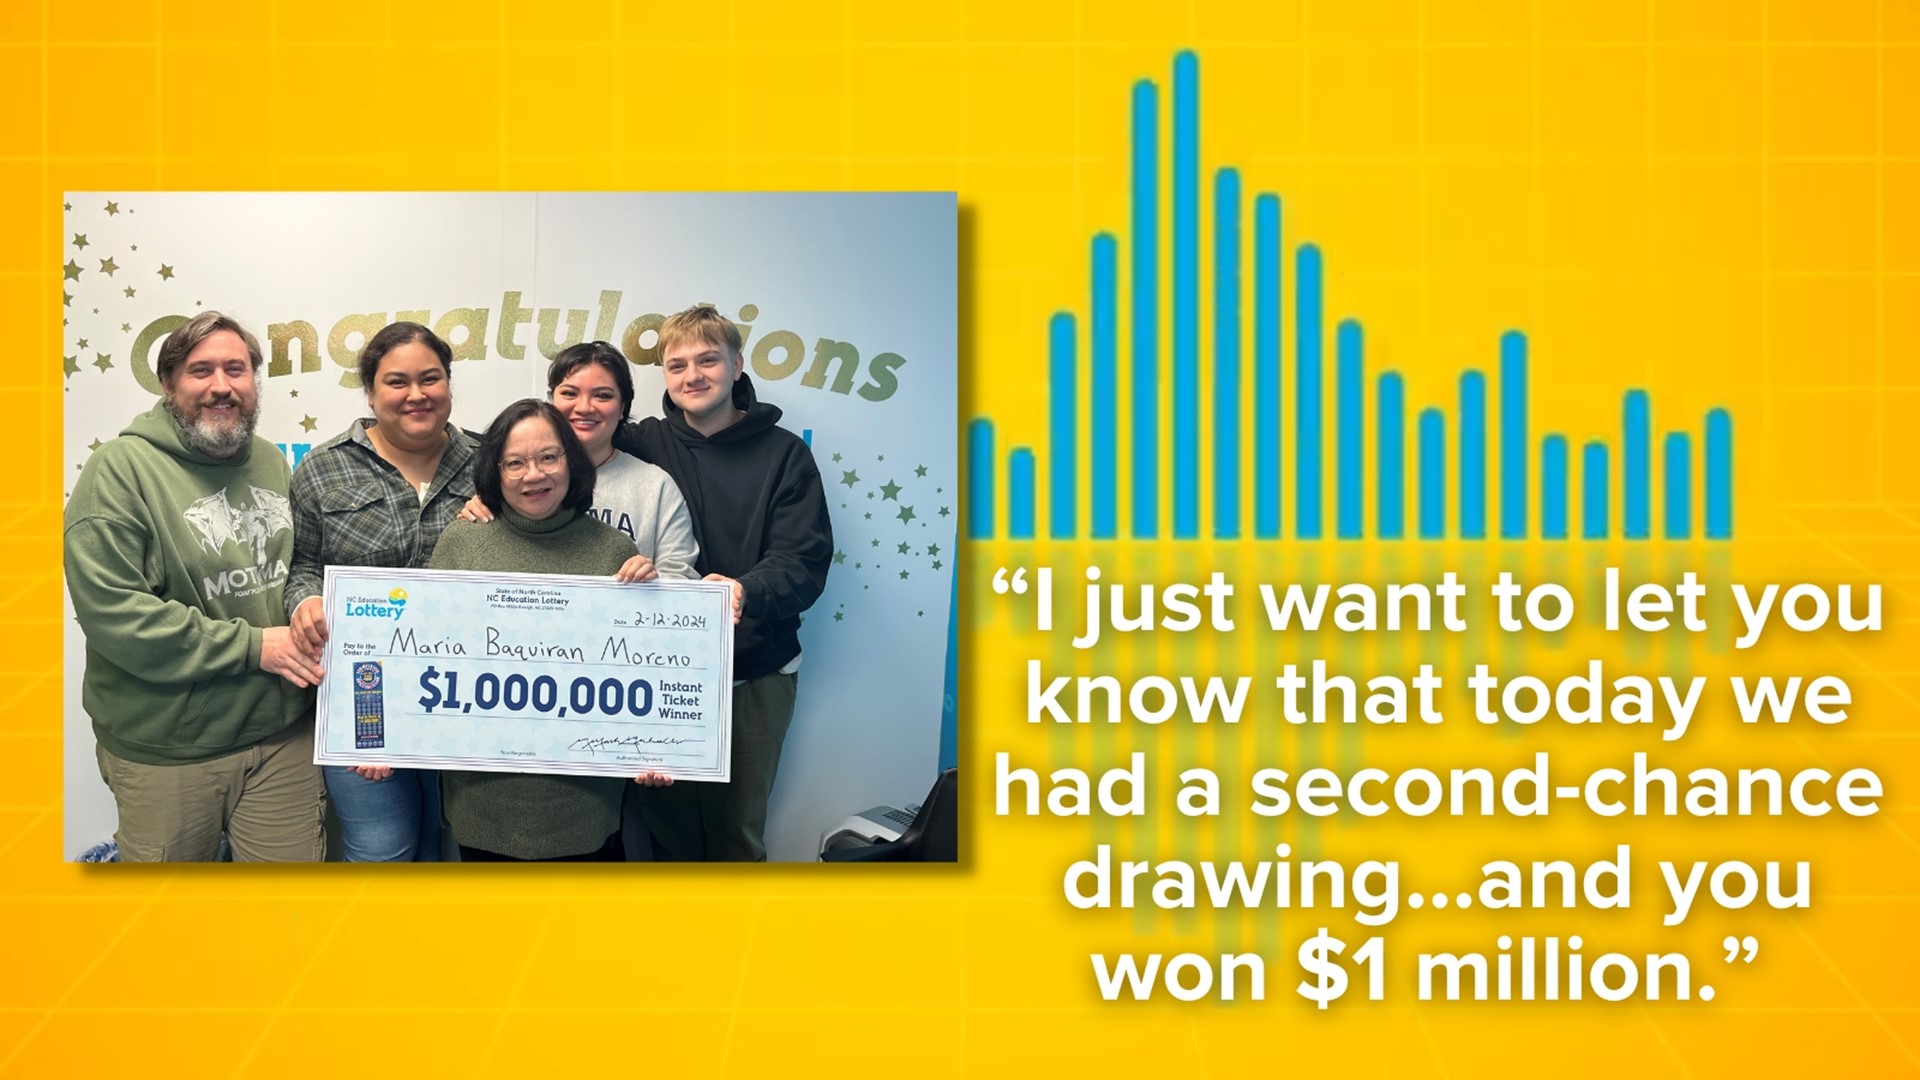 Listen to the phone call that Maria Moreno got from a North Carolina Lottery representative to tell her she'd won $1 million!